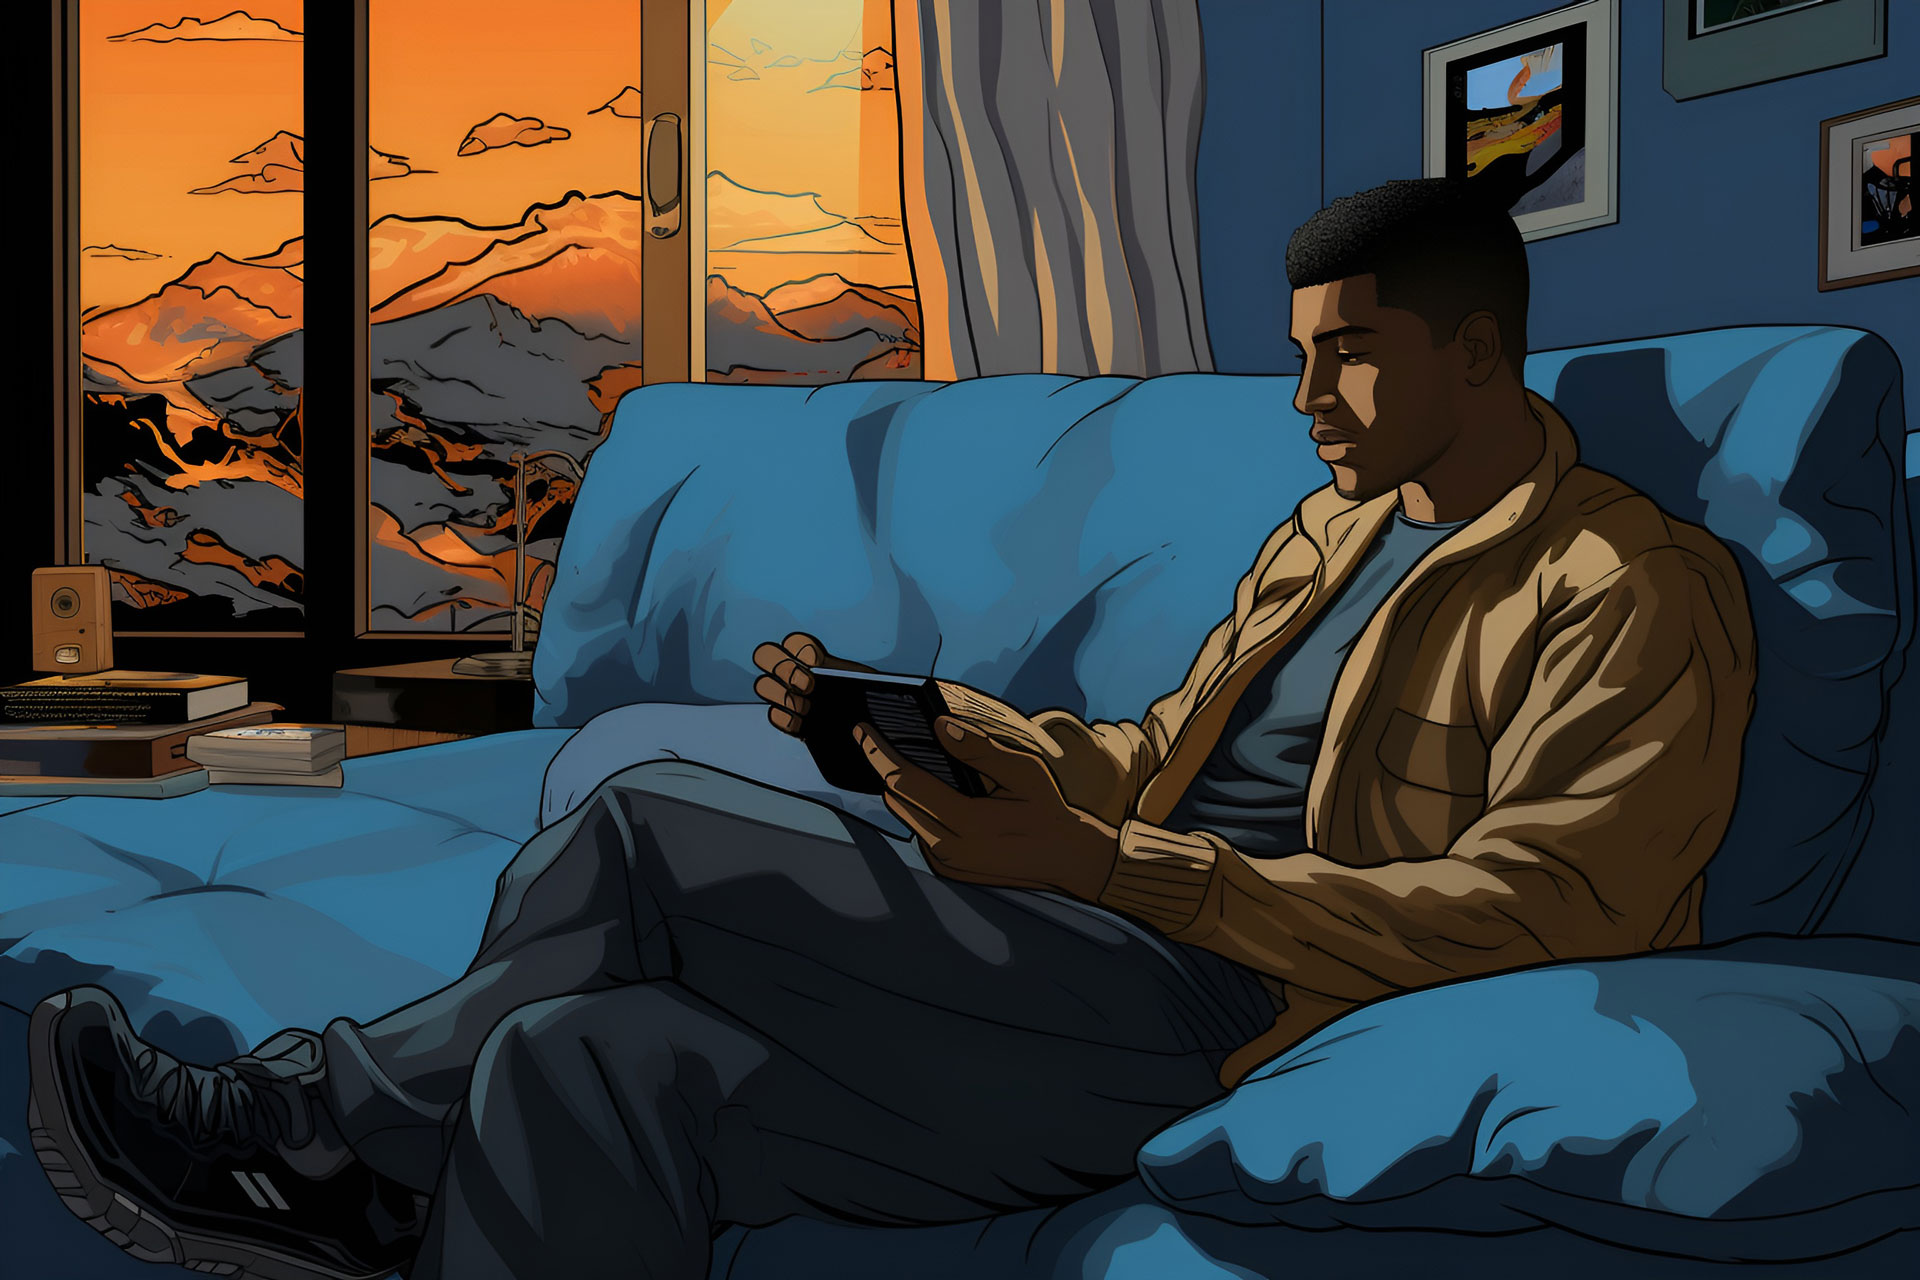 An illustration of a man seating in a couch holding a video game controller or electronic device.